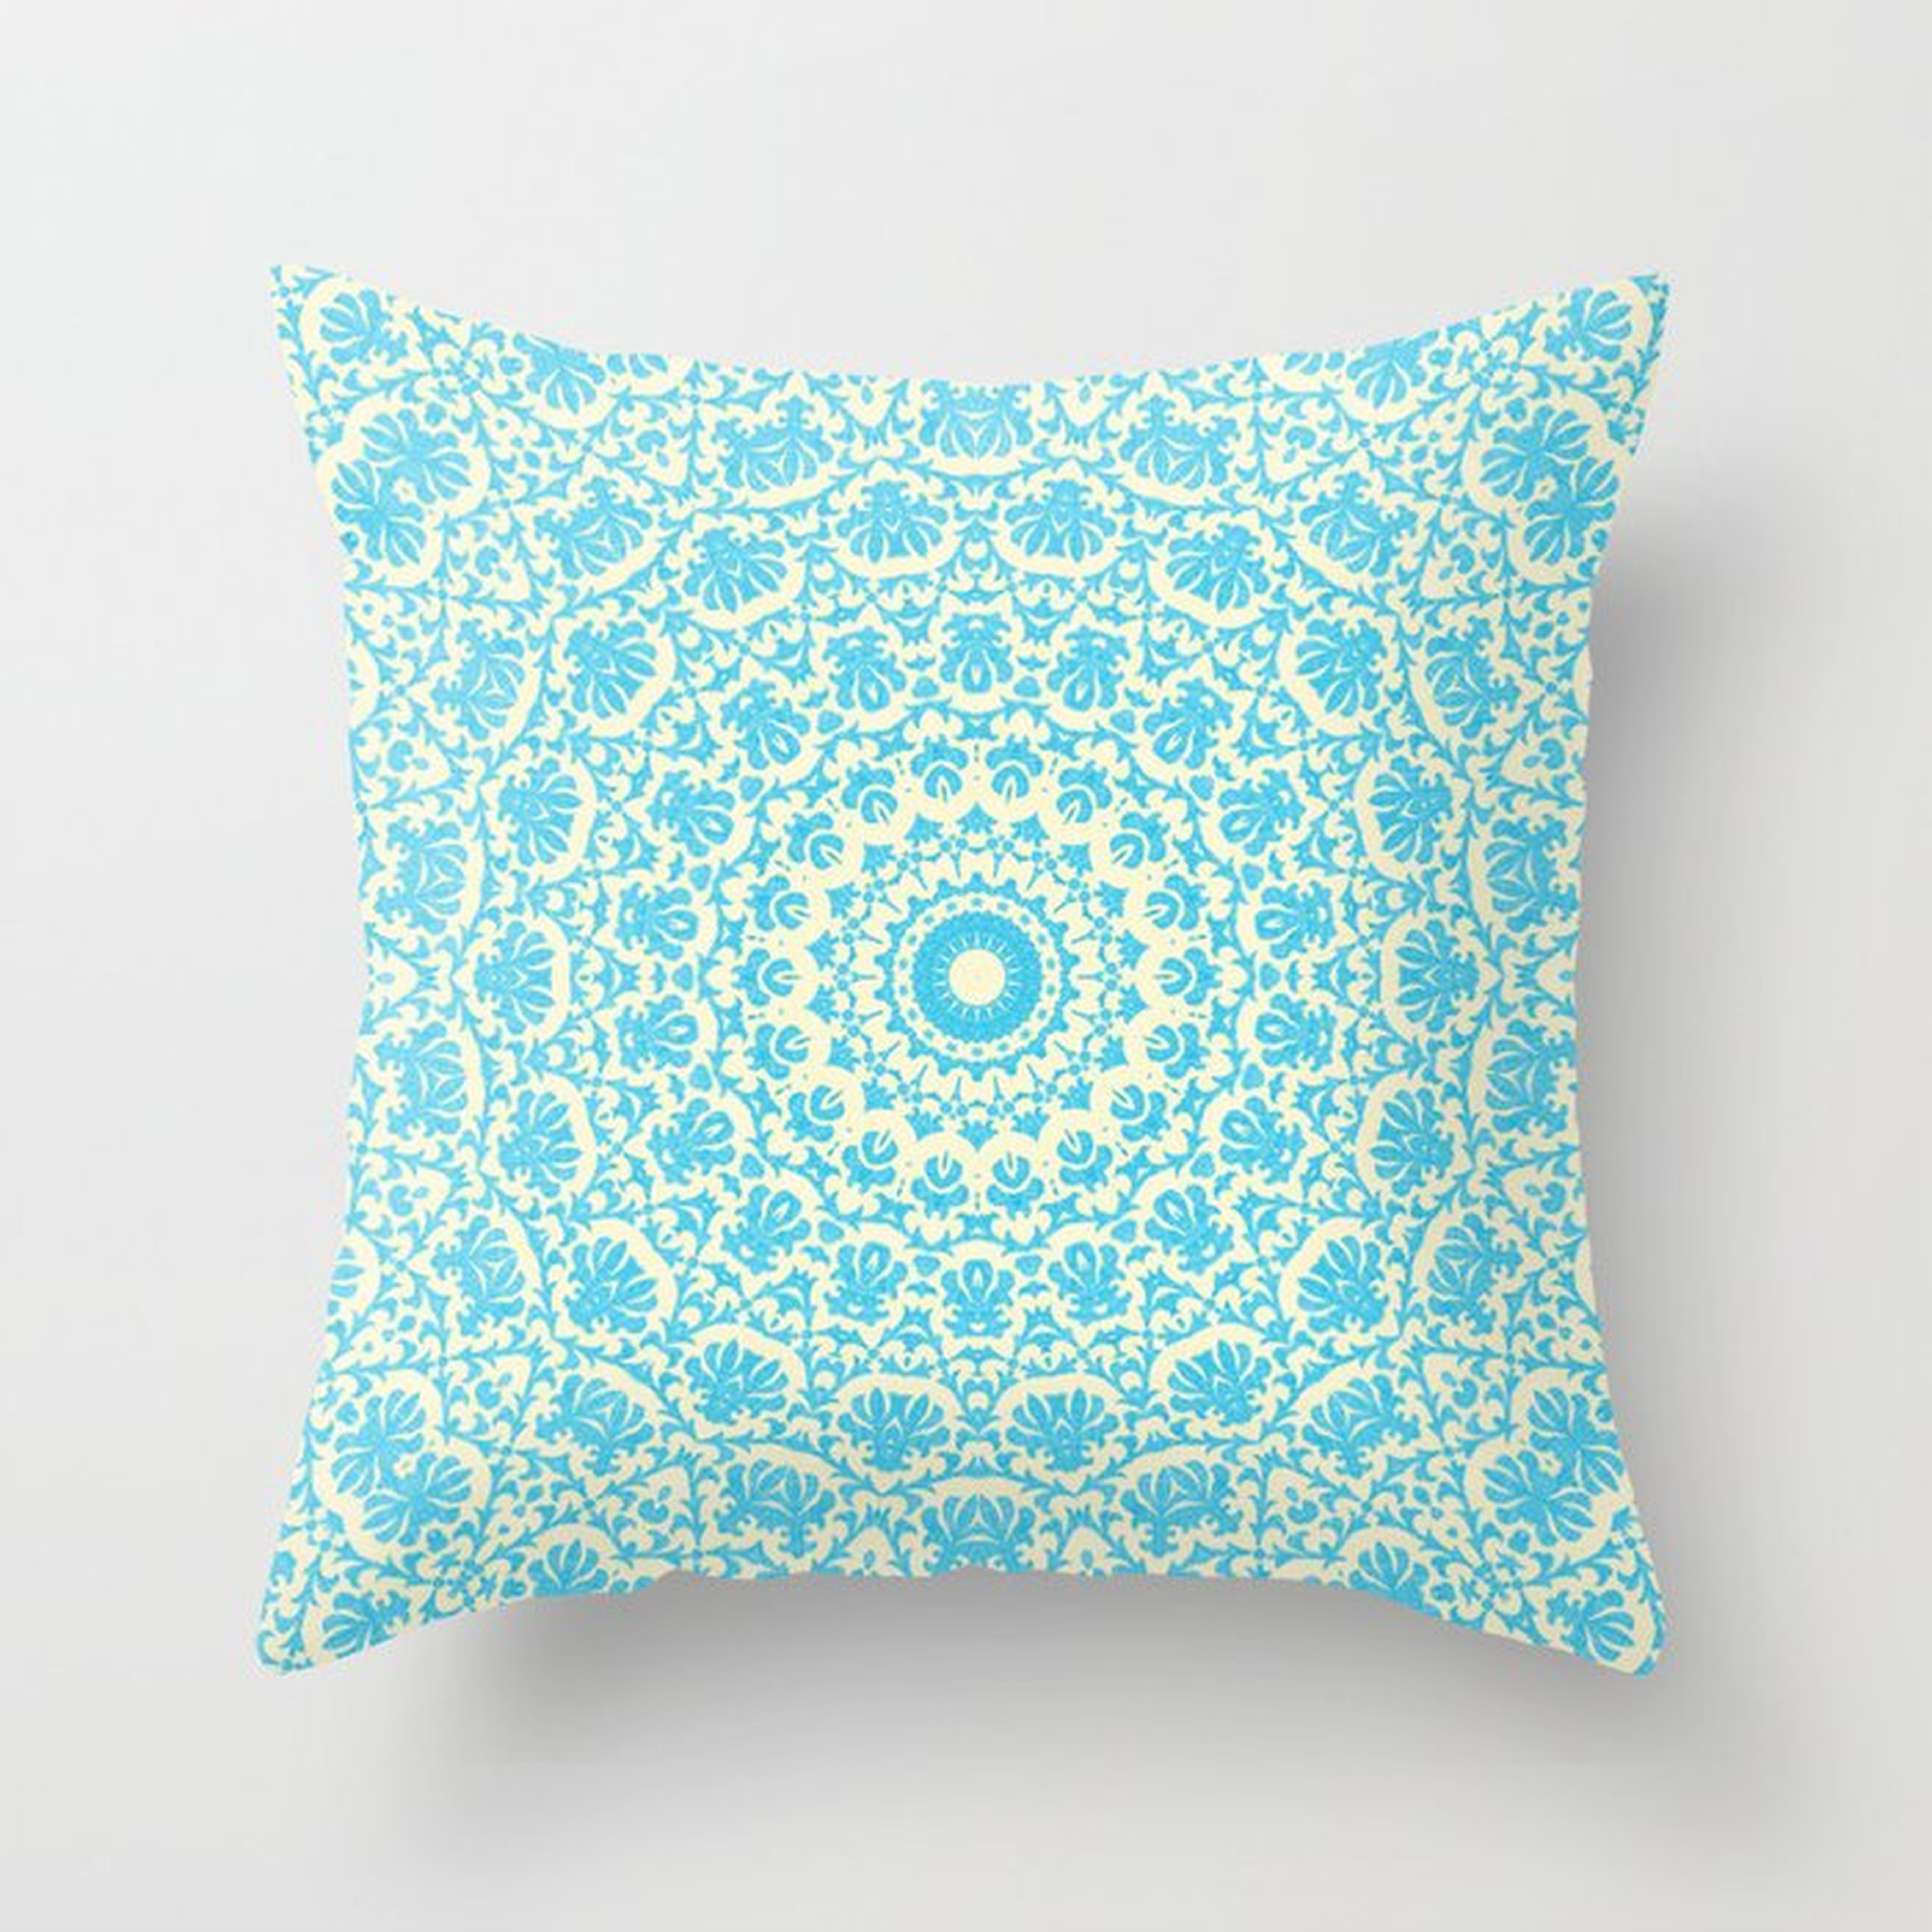 Aqua Twirl Throw Pillow by Sylvia Cook Photography - Cover (24" x 24") With Pillow Insert - Indoor Pillow - Society6